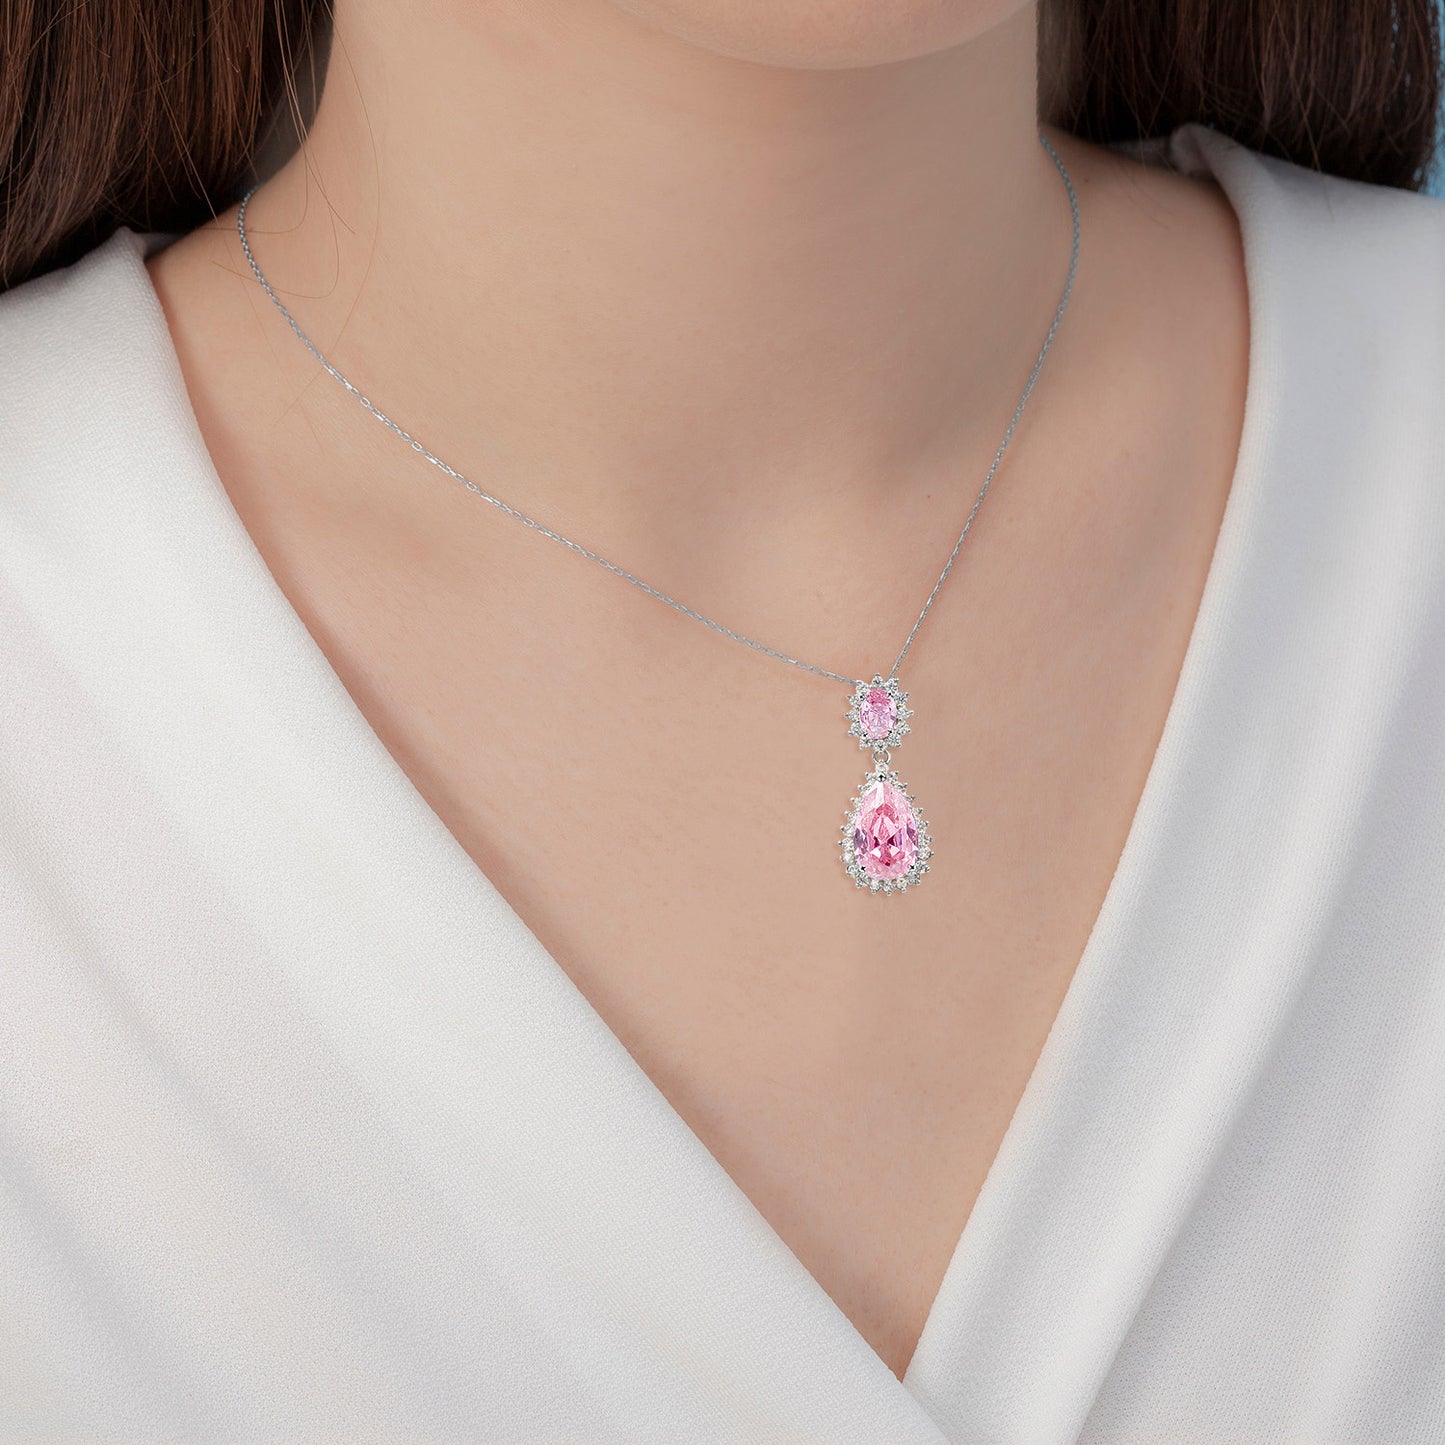 Lavencious Teardrop Dangle with AAA Pink Cubic Zirconia Necklace & Earrings Set